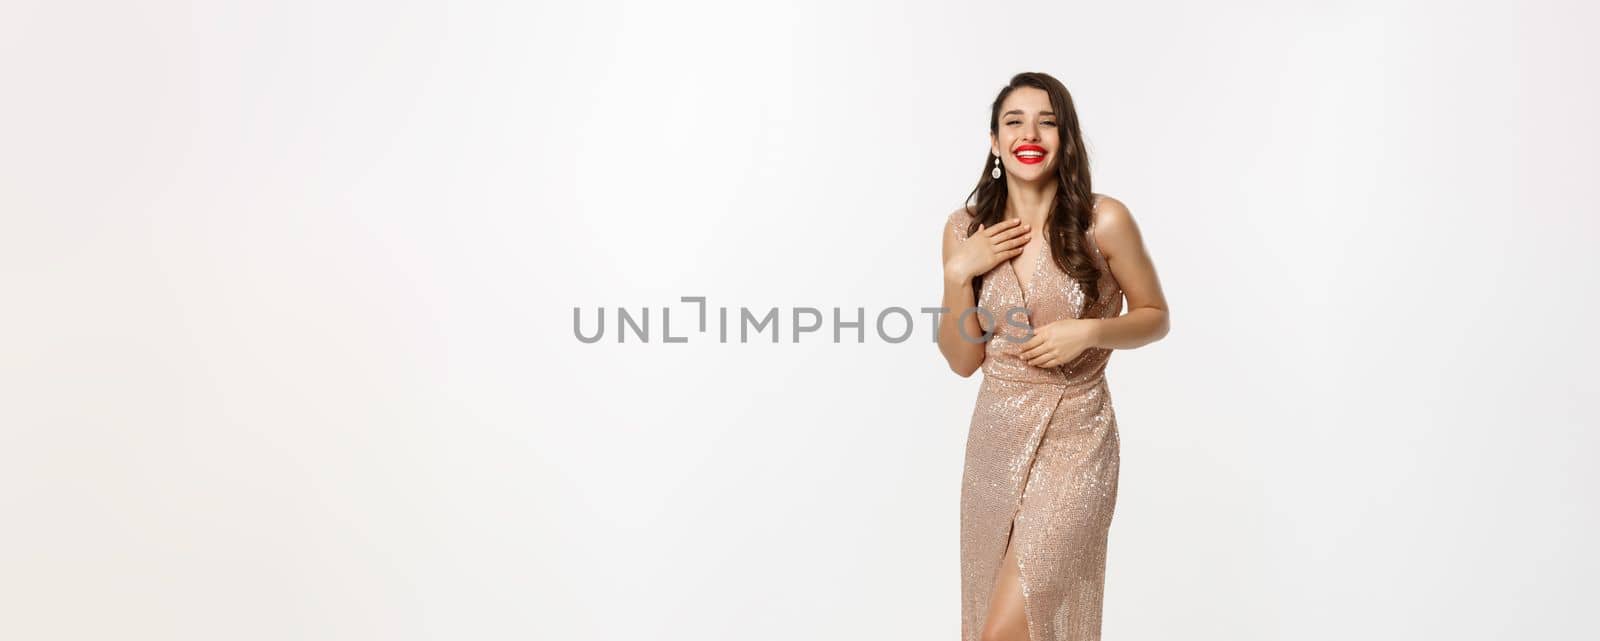 Party and celebration concept. Full-length of beautiful woman in elegant dress standing near Christmas gifts, laughing happy, standing over white background.